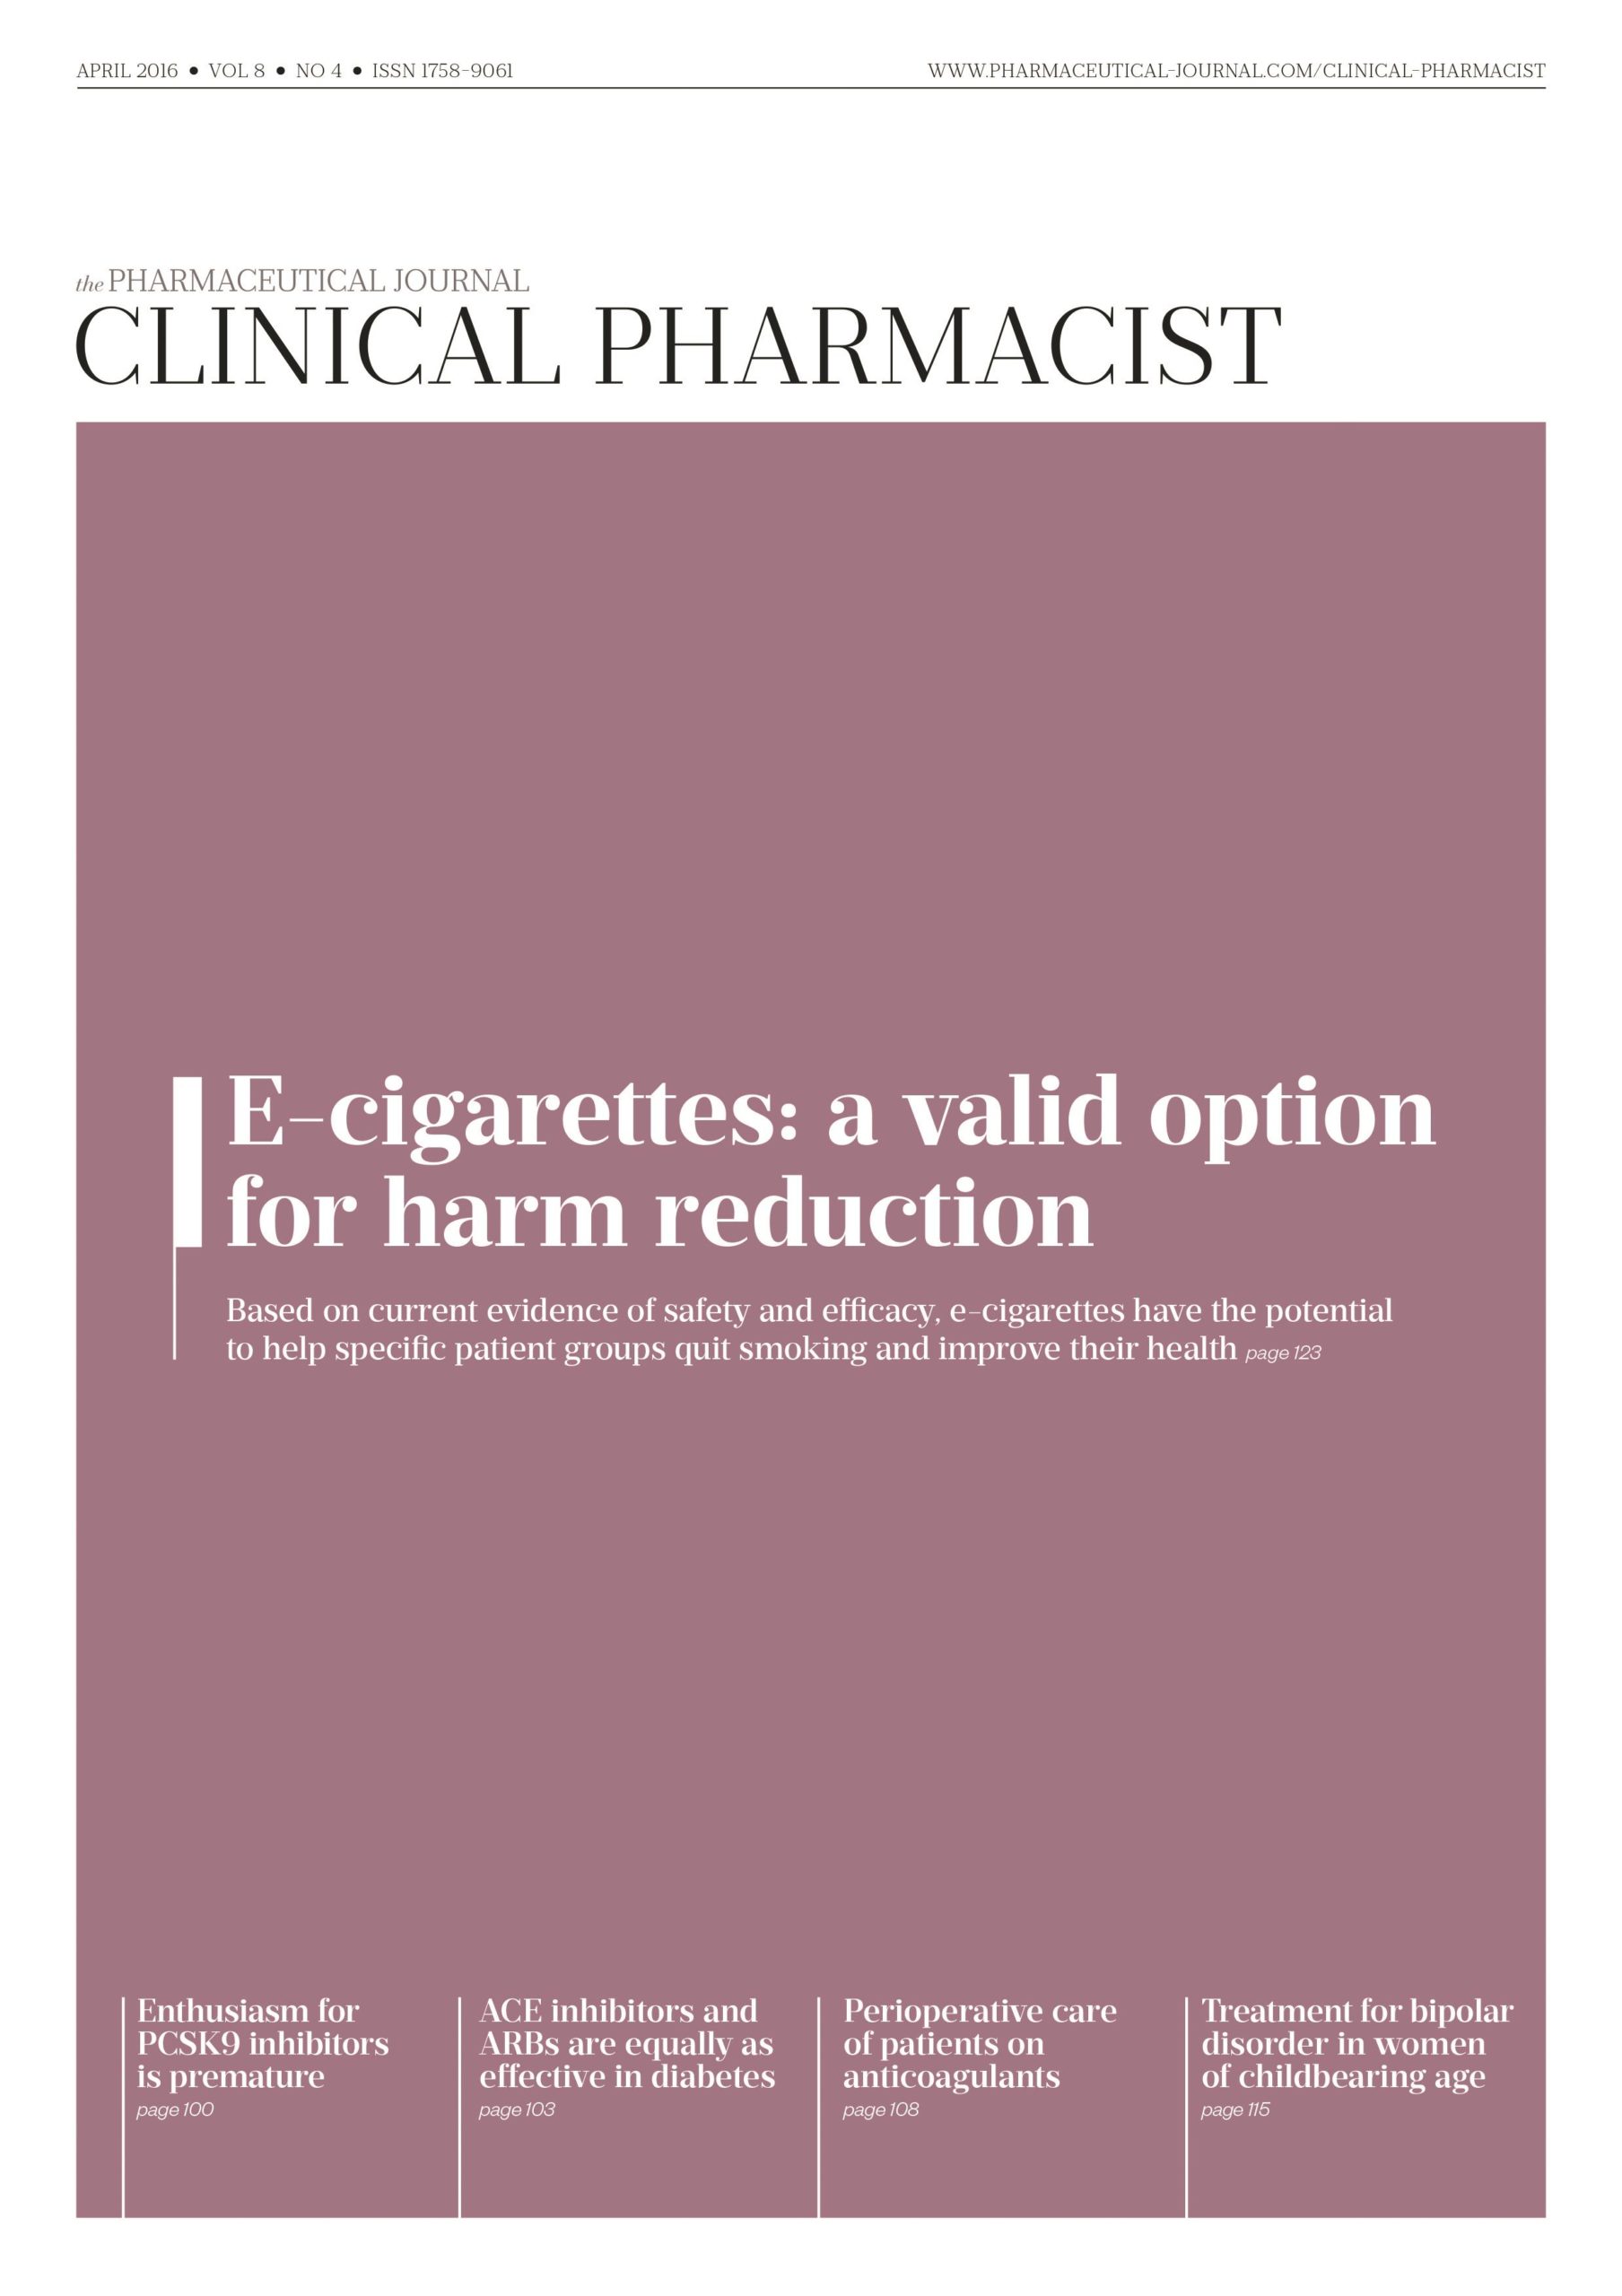 Publication issue cover for CP, April 2016, Vol 8, No 4